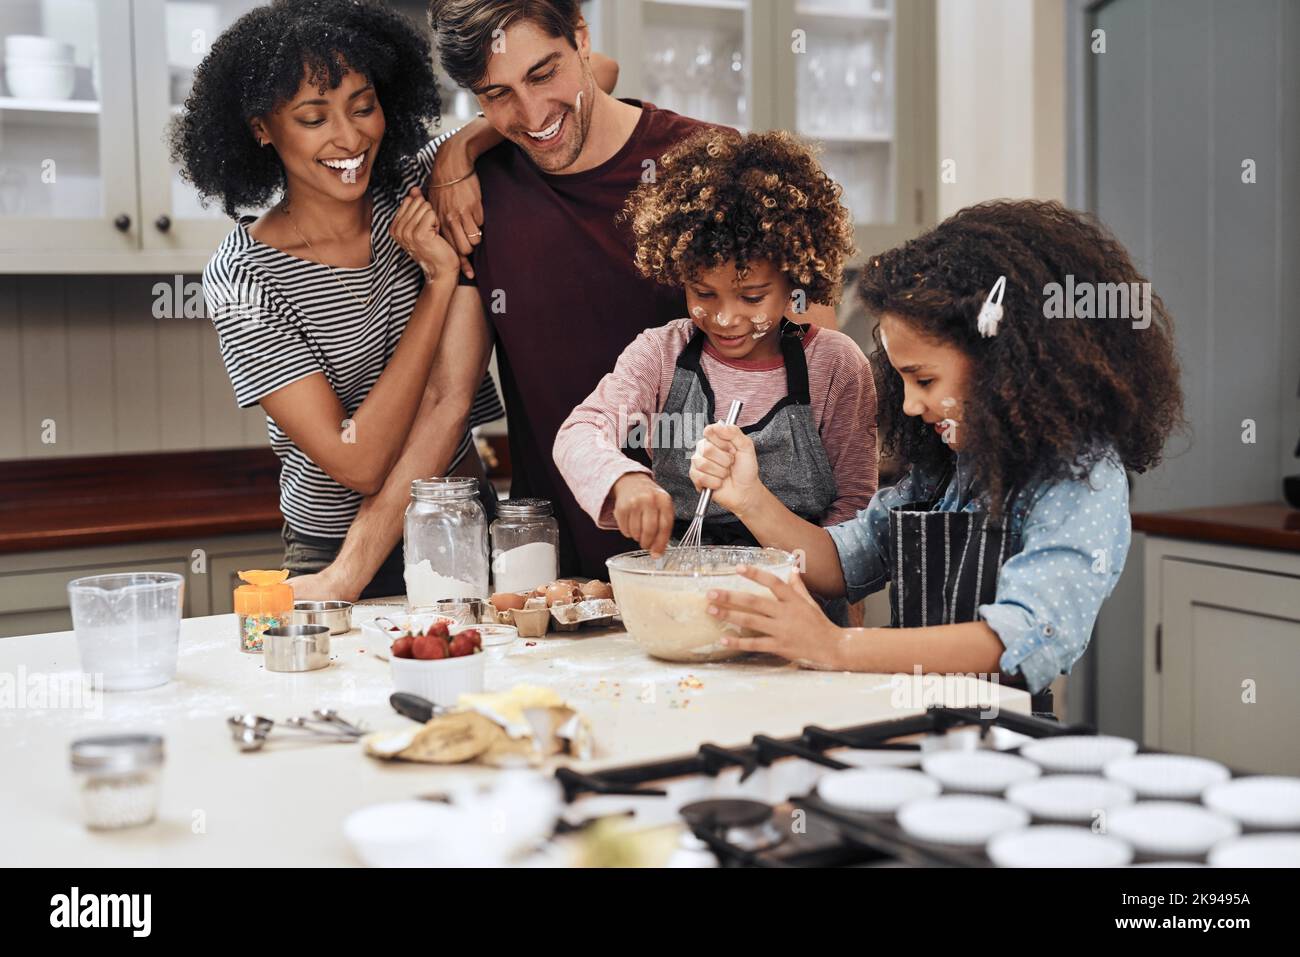 They caught on really fast. a young couple baking at home with their two children. Stock Photo